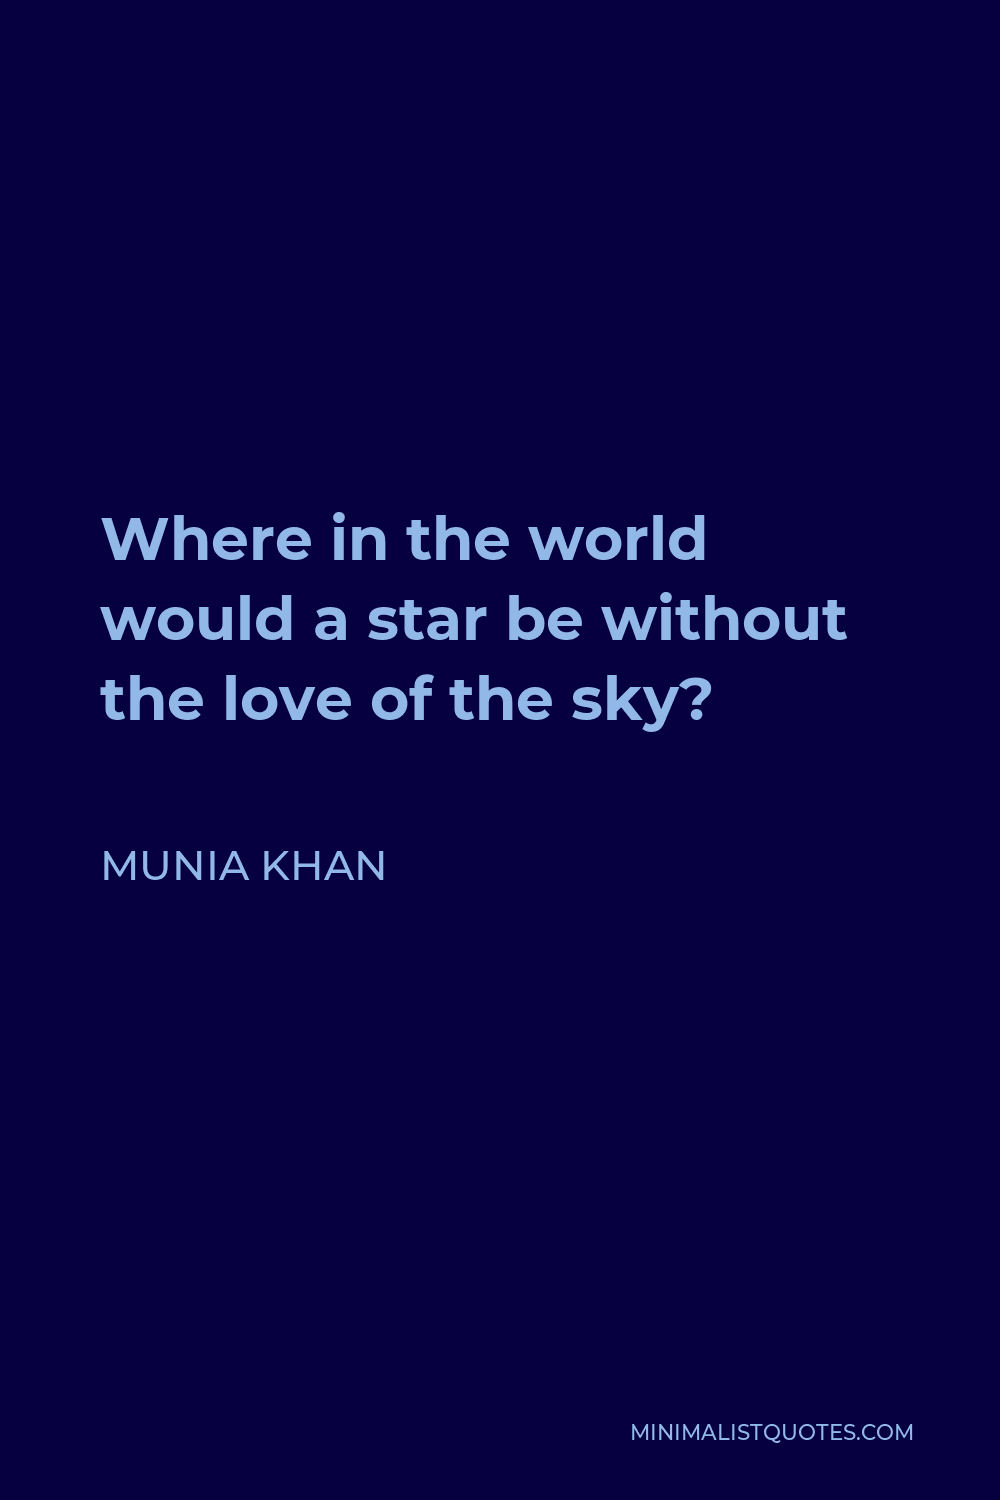 Munia Khan Quote - Where in the world would a star be without the love of the sky?